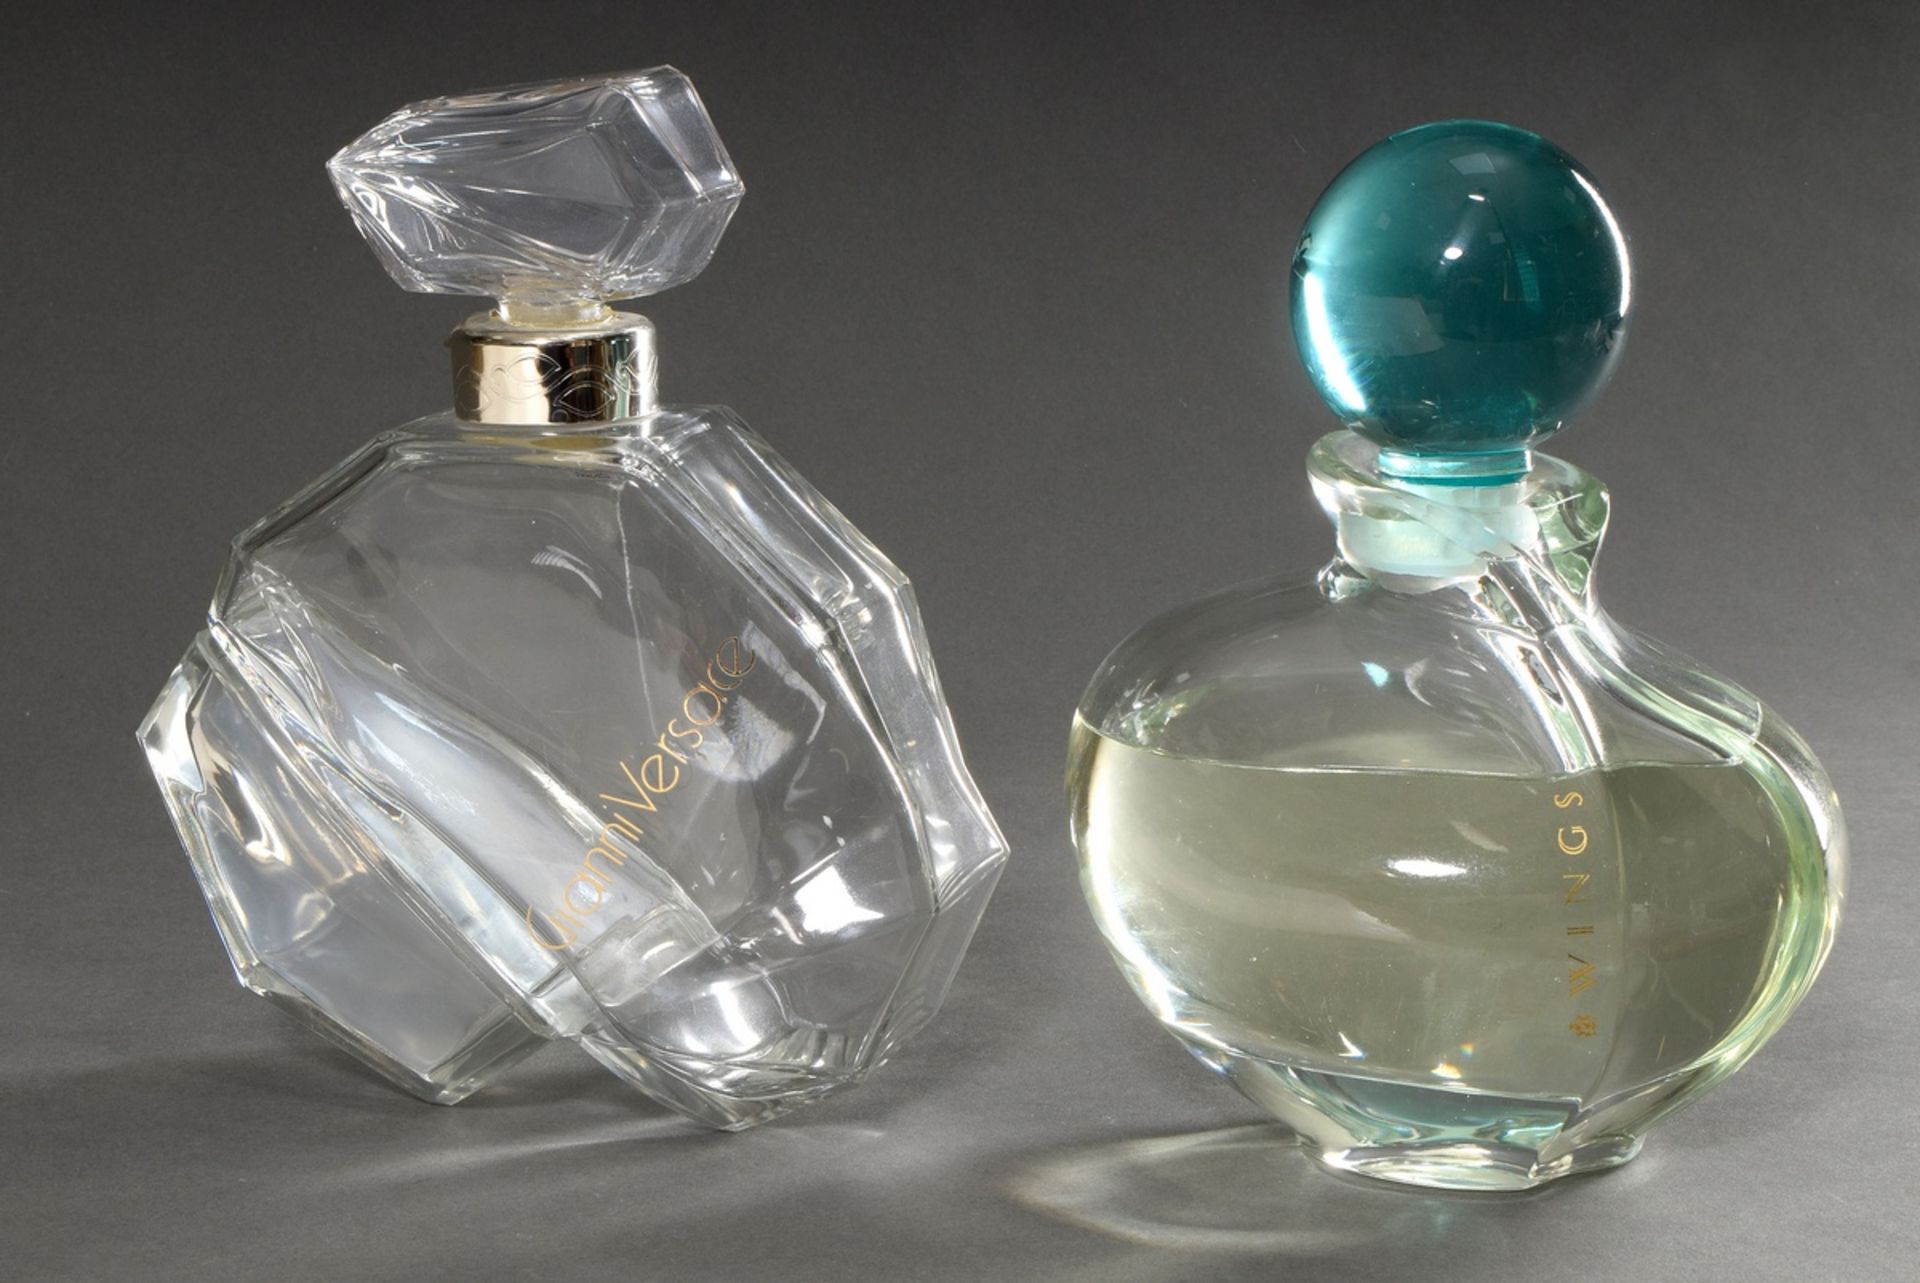 2 Modern perfume factices in oversize: Versace "Gianni Versace" (1981, h. 25cm) and Giorgio Beverly